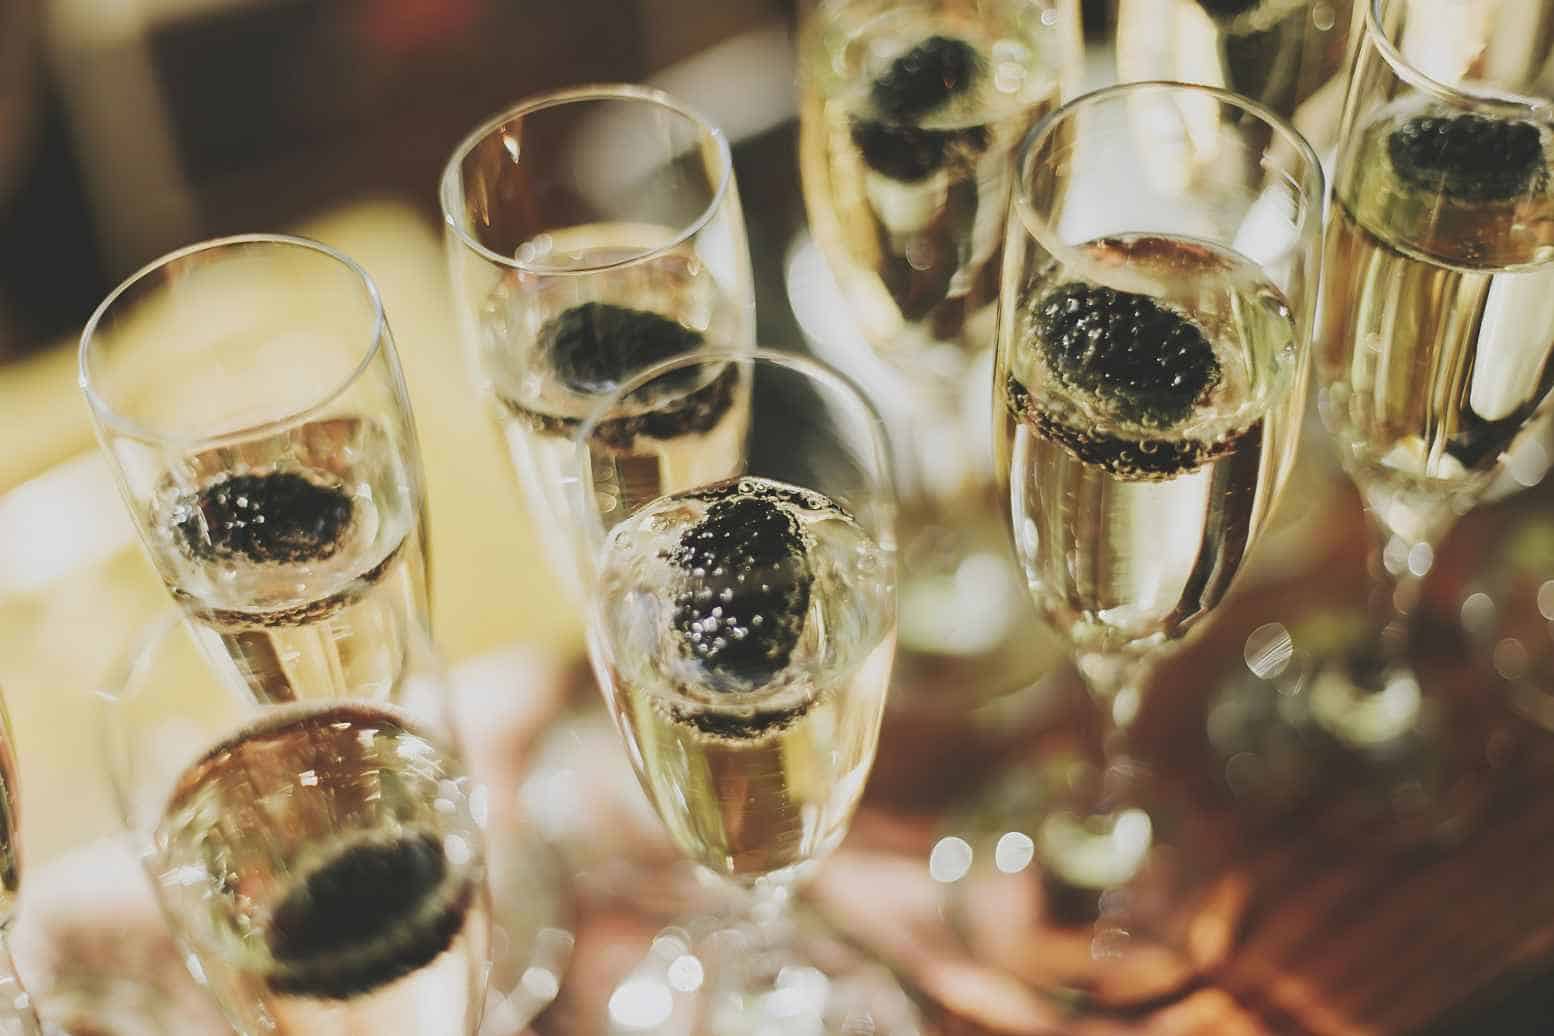 4 Additional Information about Sparkling Wines